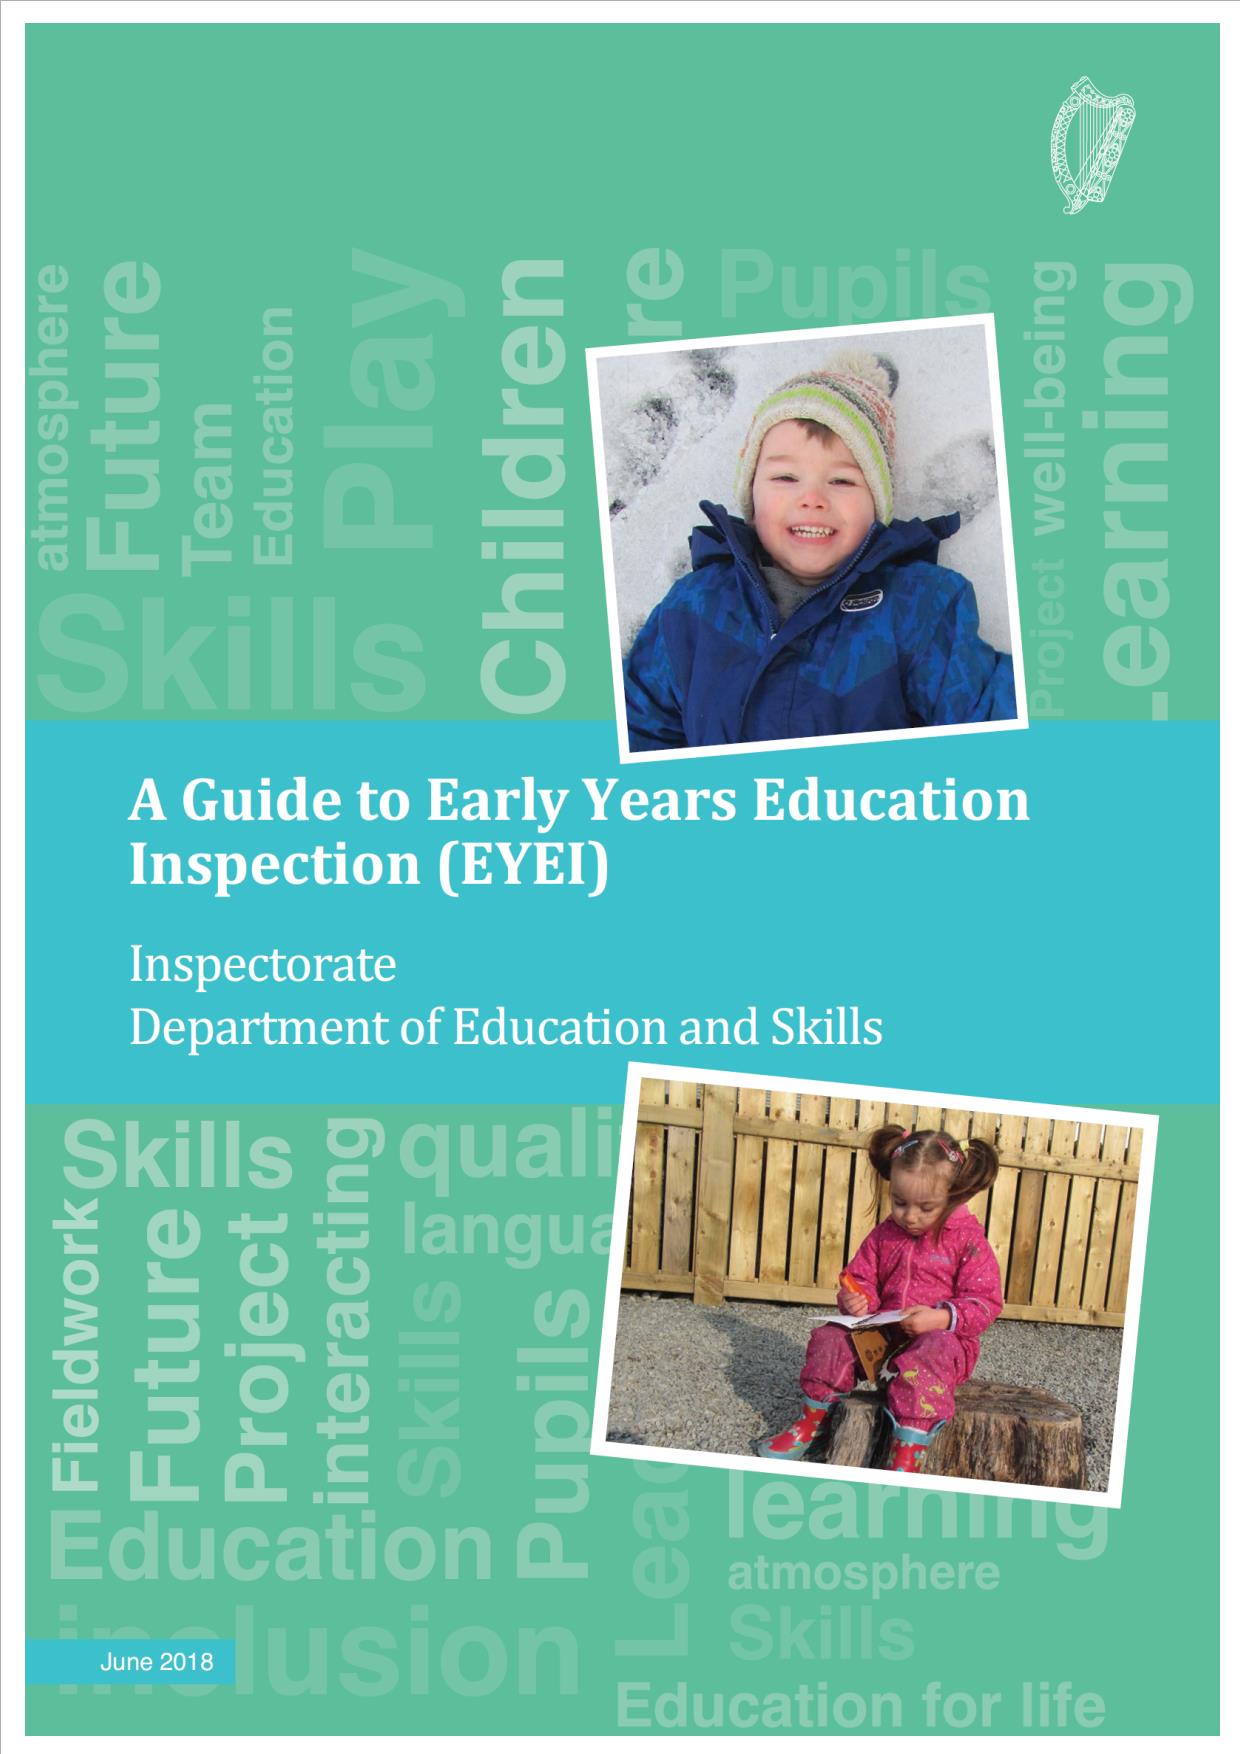 A guide to early years education inspection